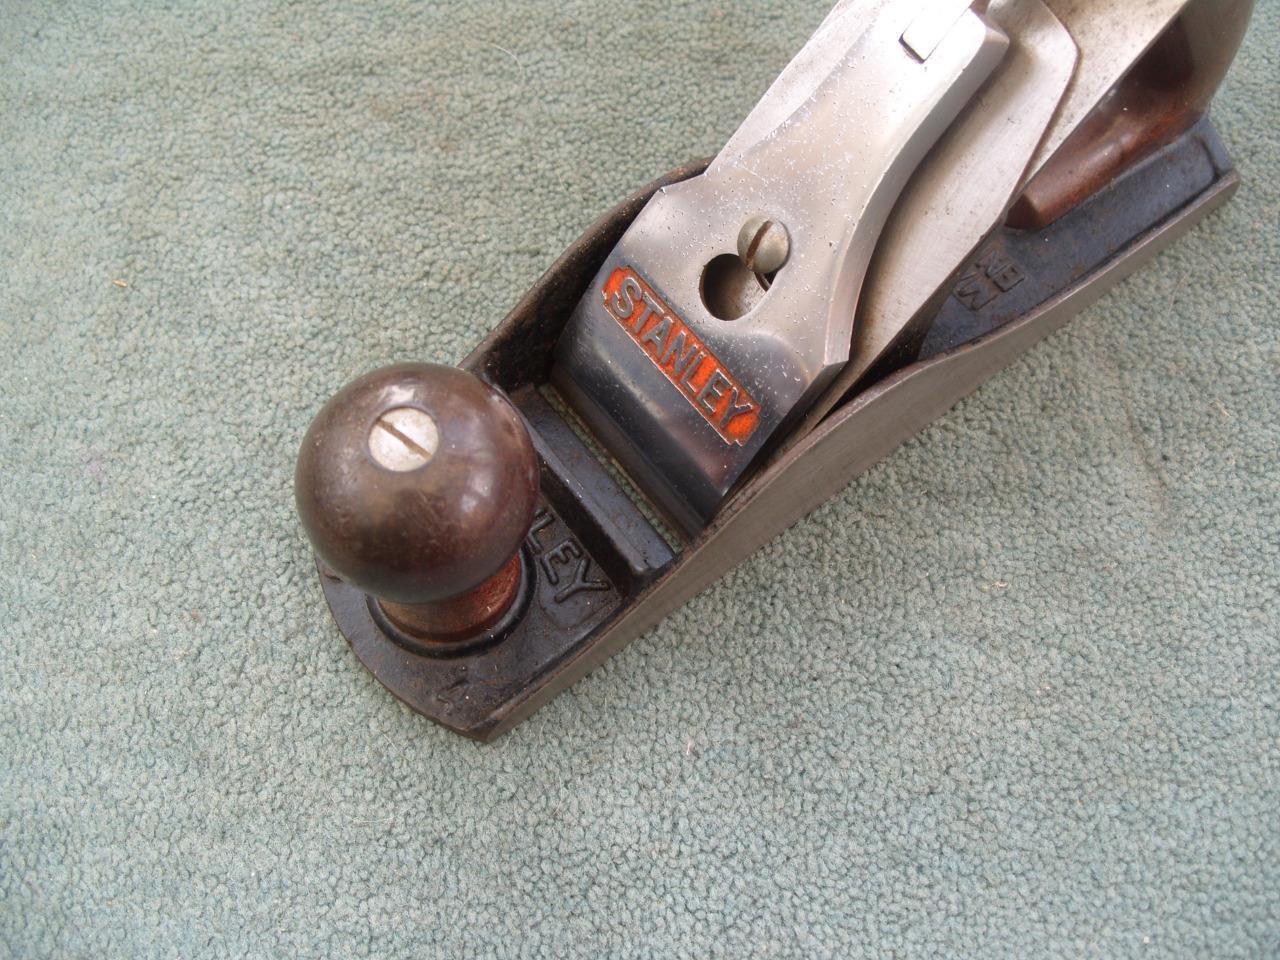 Stanley No 4 Smoothing plane.